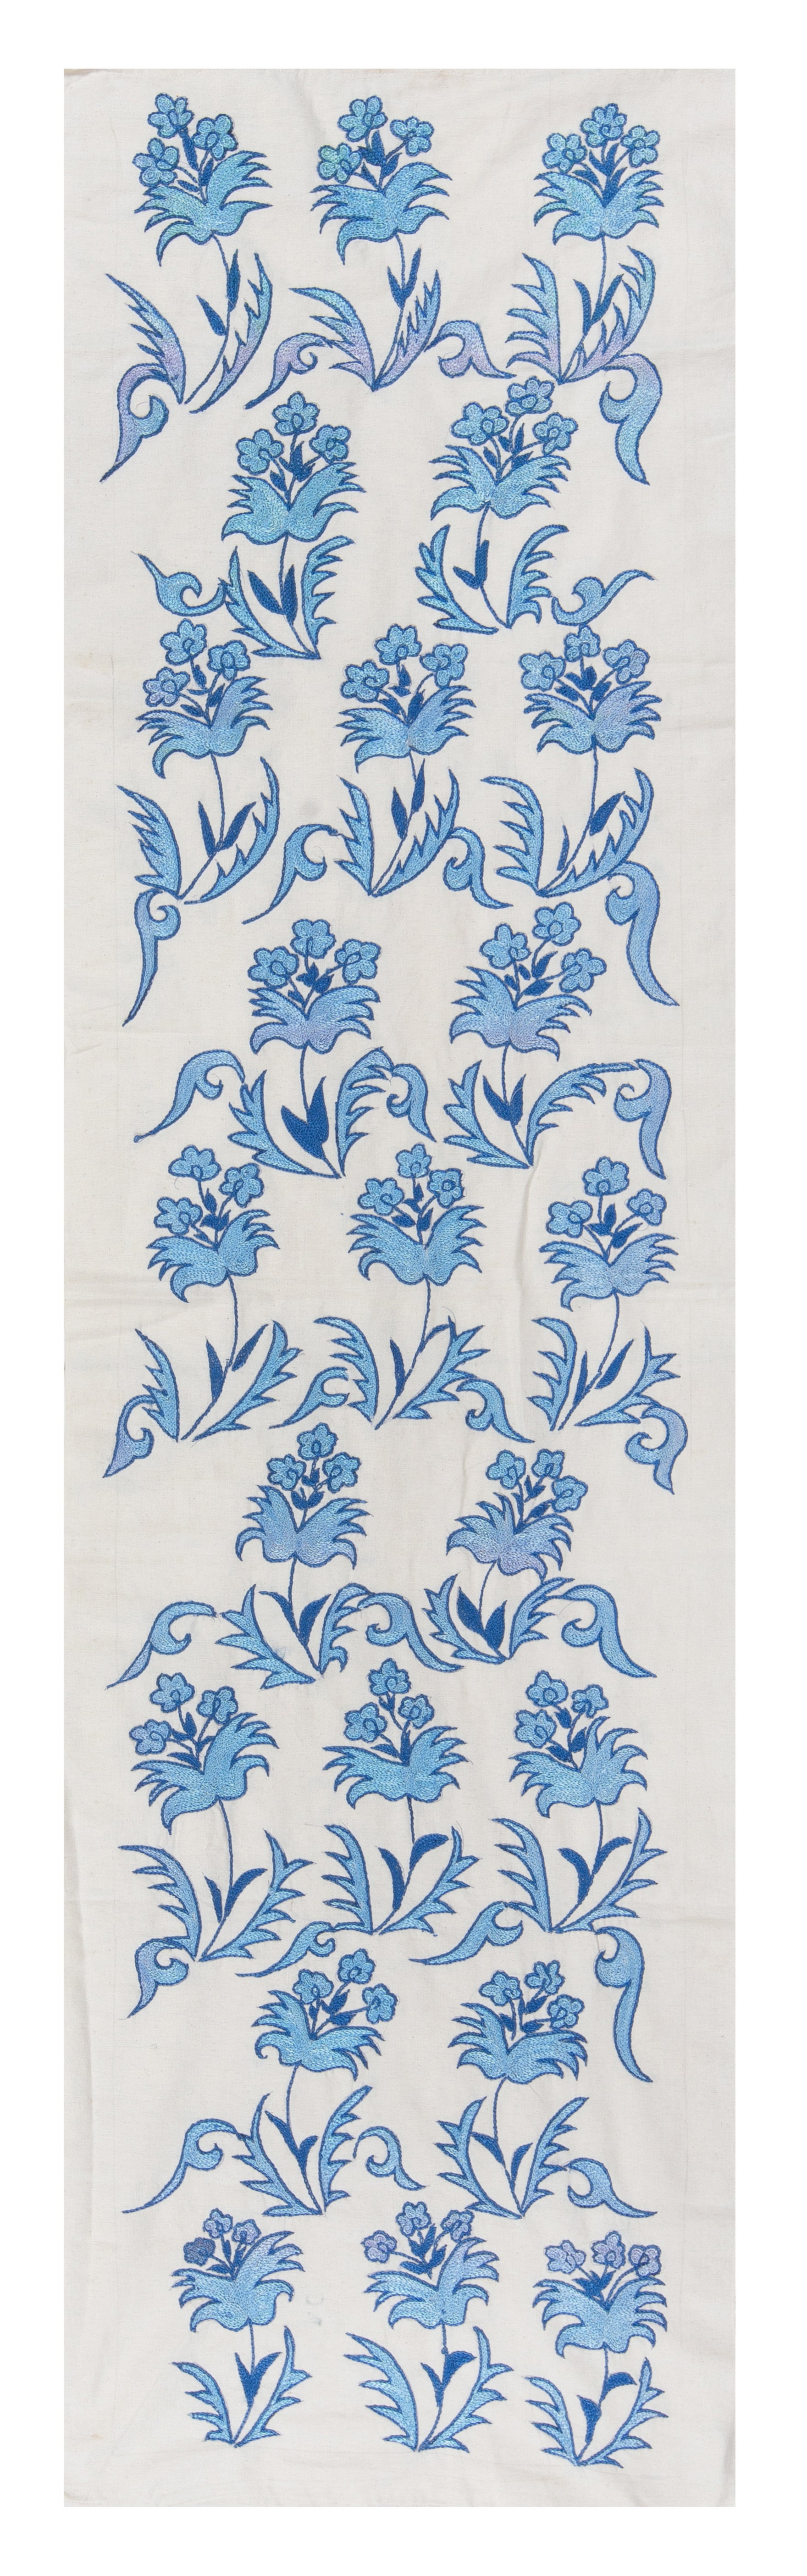 1.7x6.3 Ft Floral Suzani Table Runner, Embroidered Cotton & Silk Wall Hanging en vente